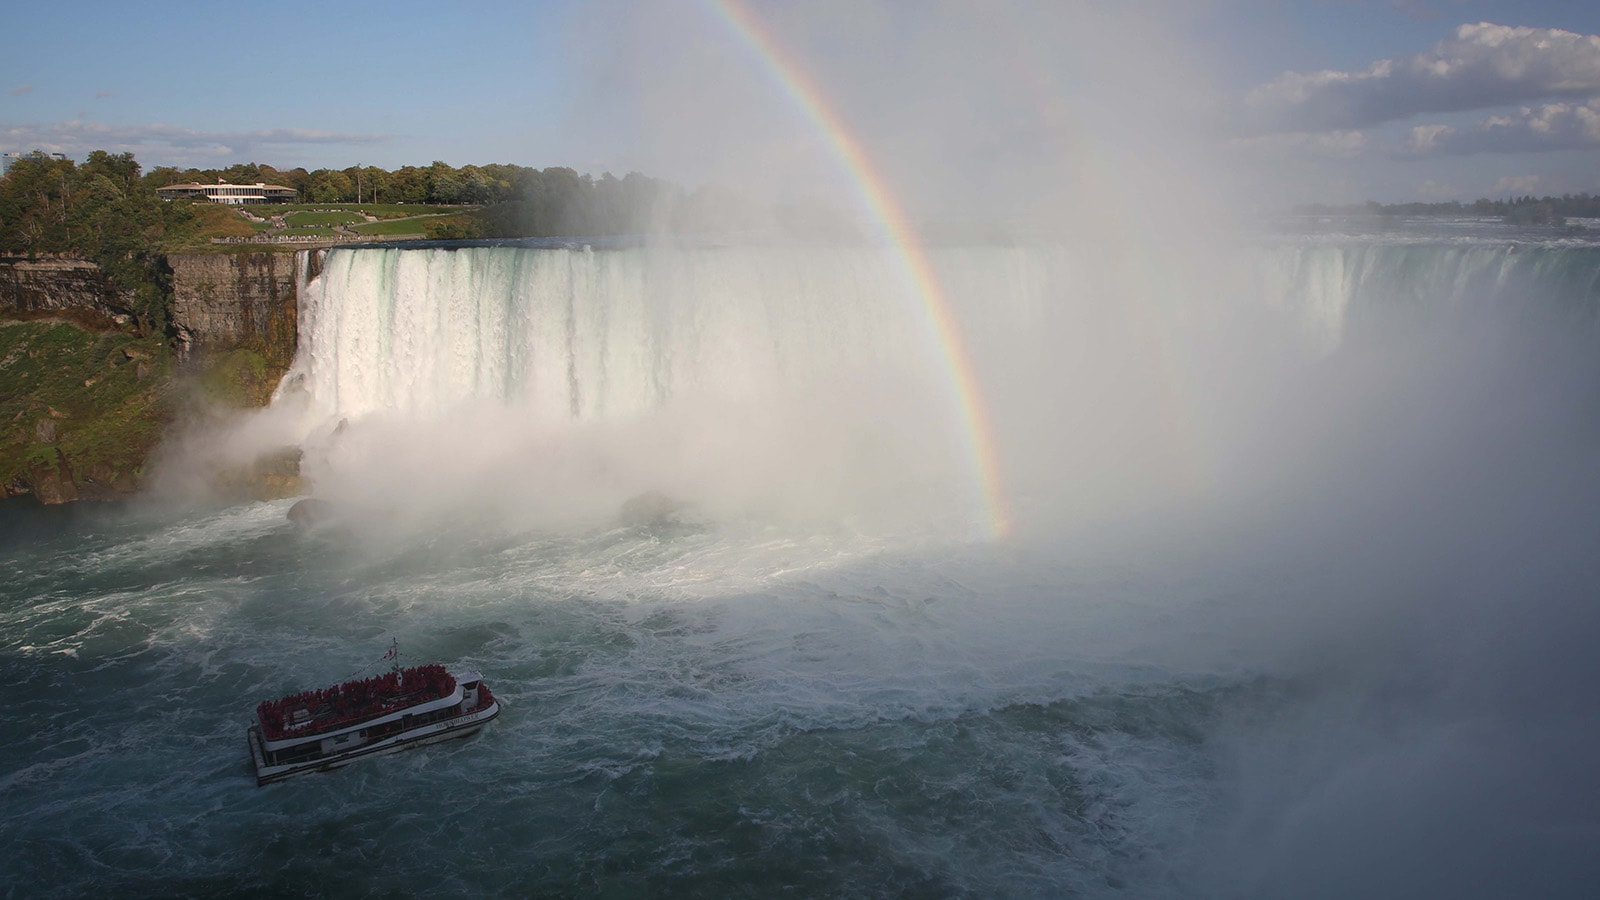 A boat operated by Hornblower Niagara Cruises ventures to the edge of Horseshoe Falls.